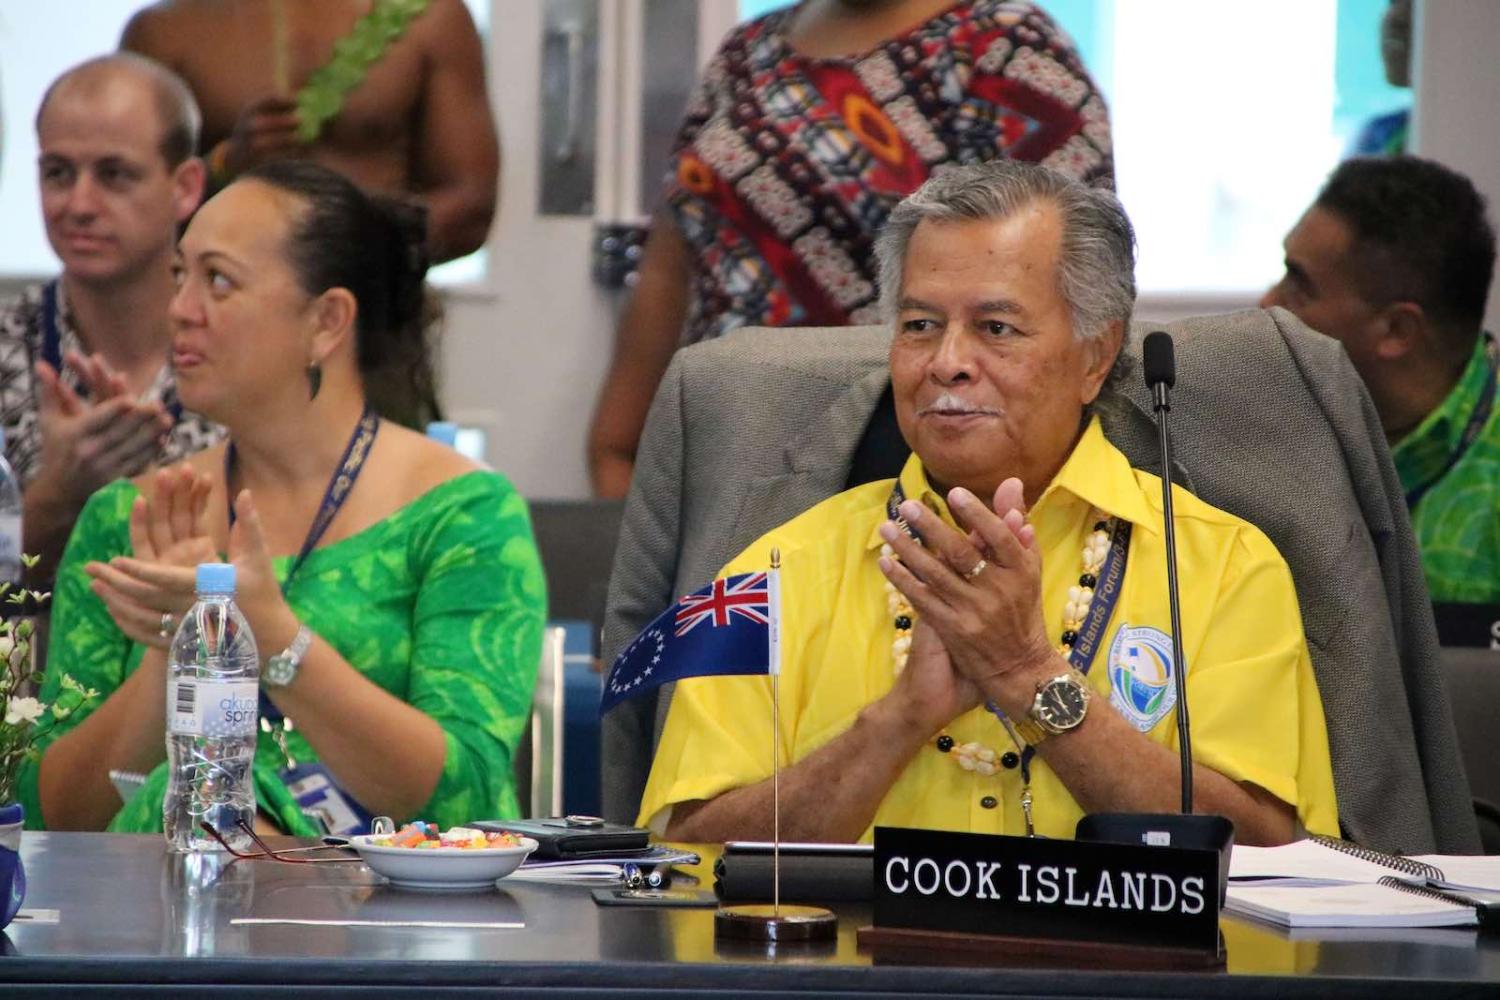 Cook Islands’ then–Prime Minister Henry Puna (right) at the “Small Island States” meeting, Nauru, September 2018 (Mike Leyral/AFP via Getty Images)